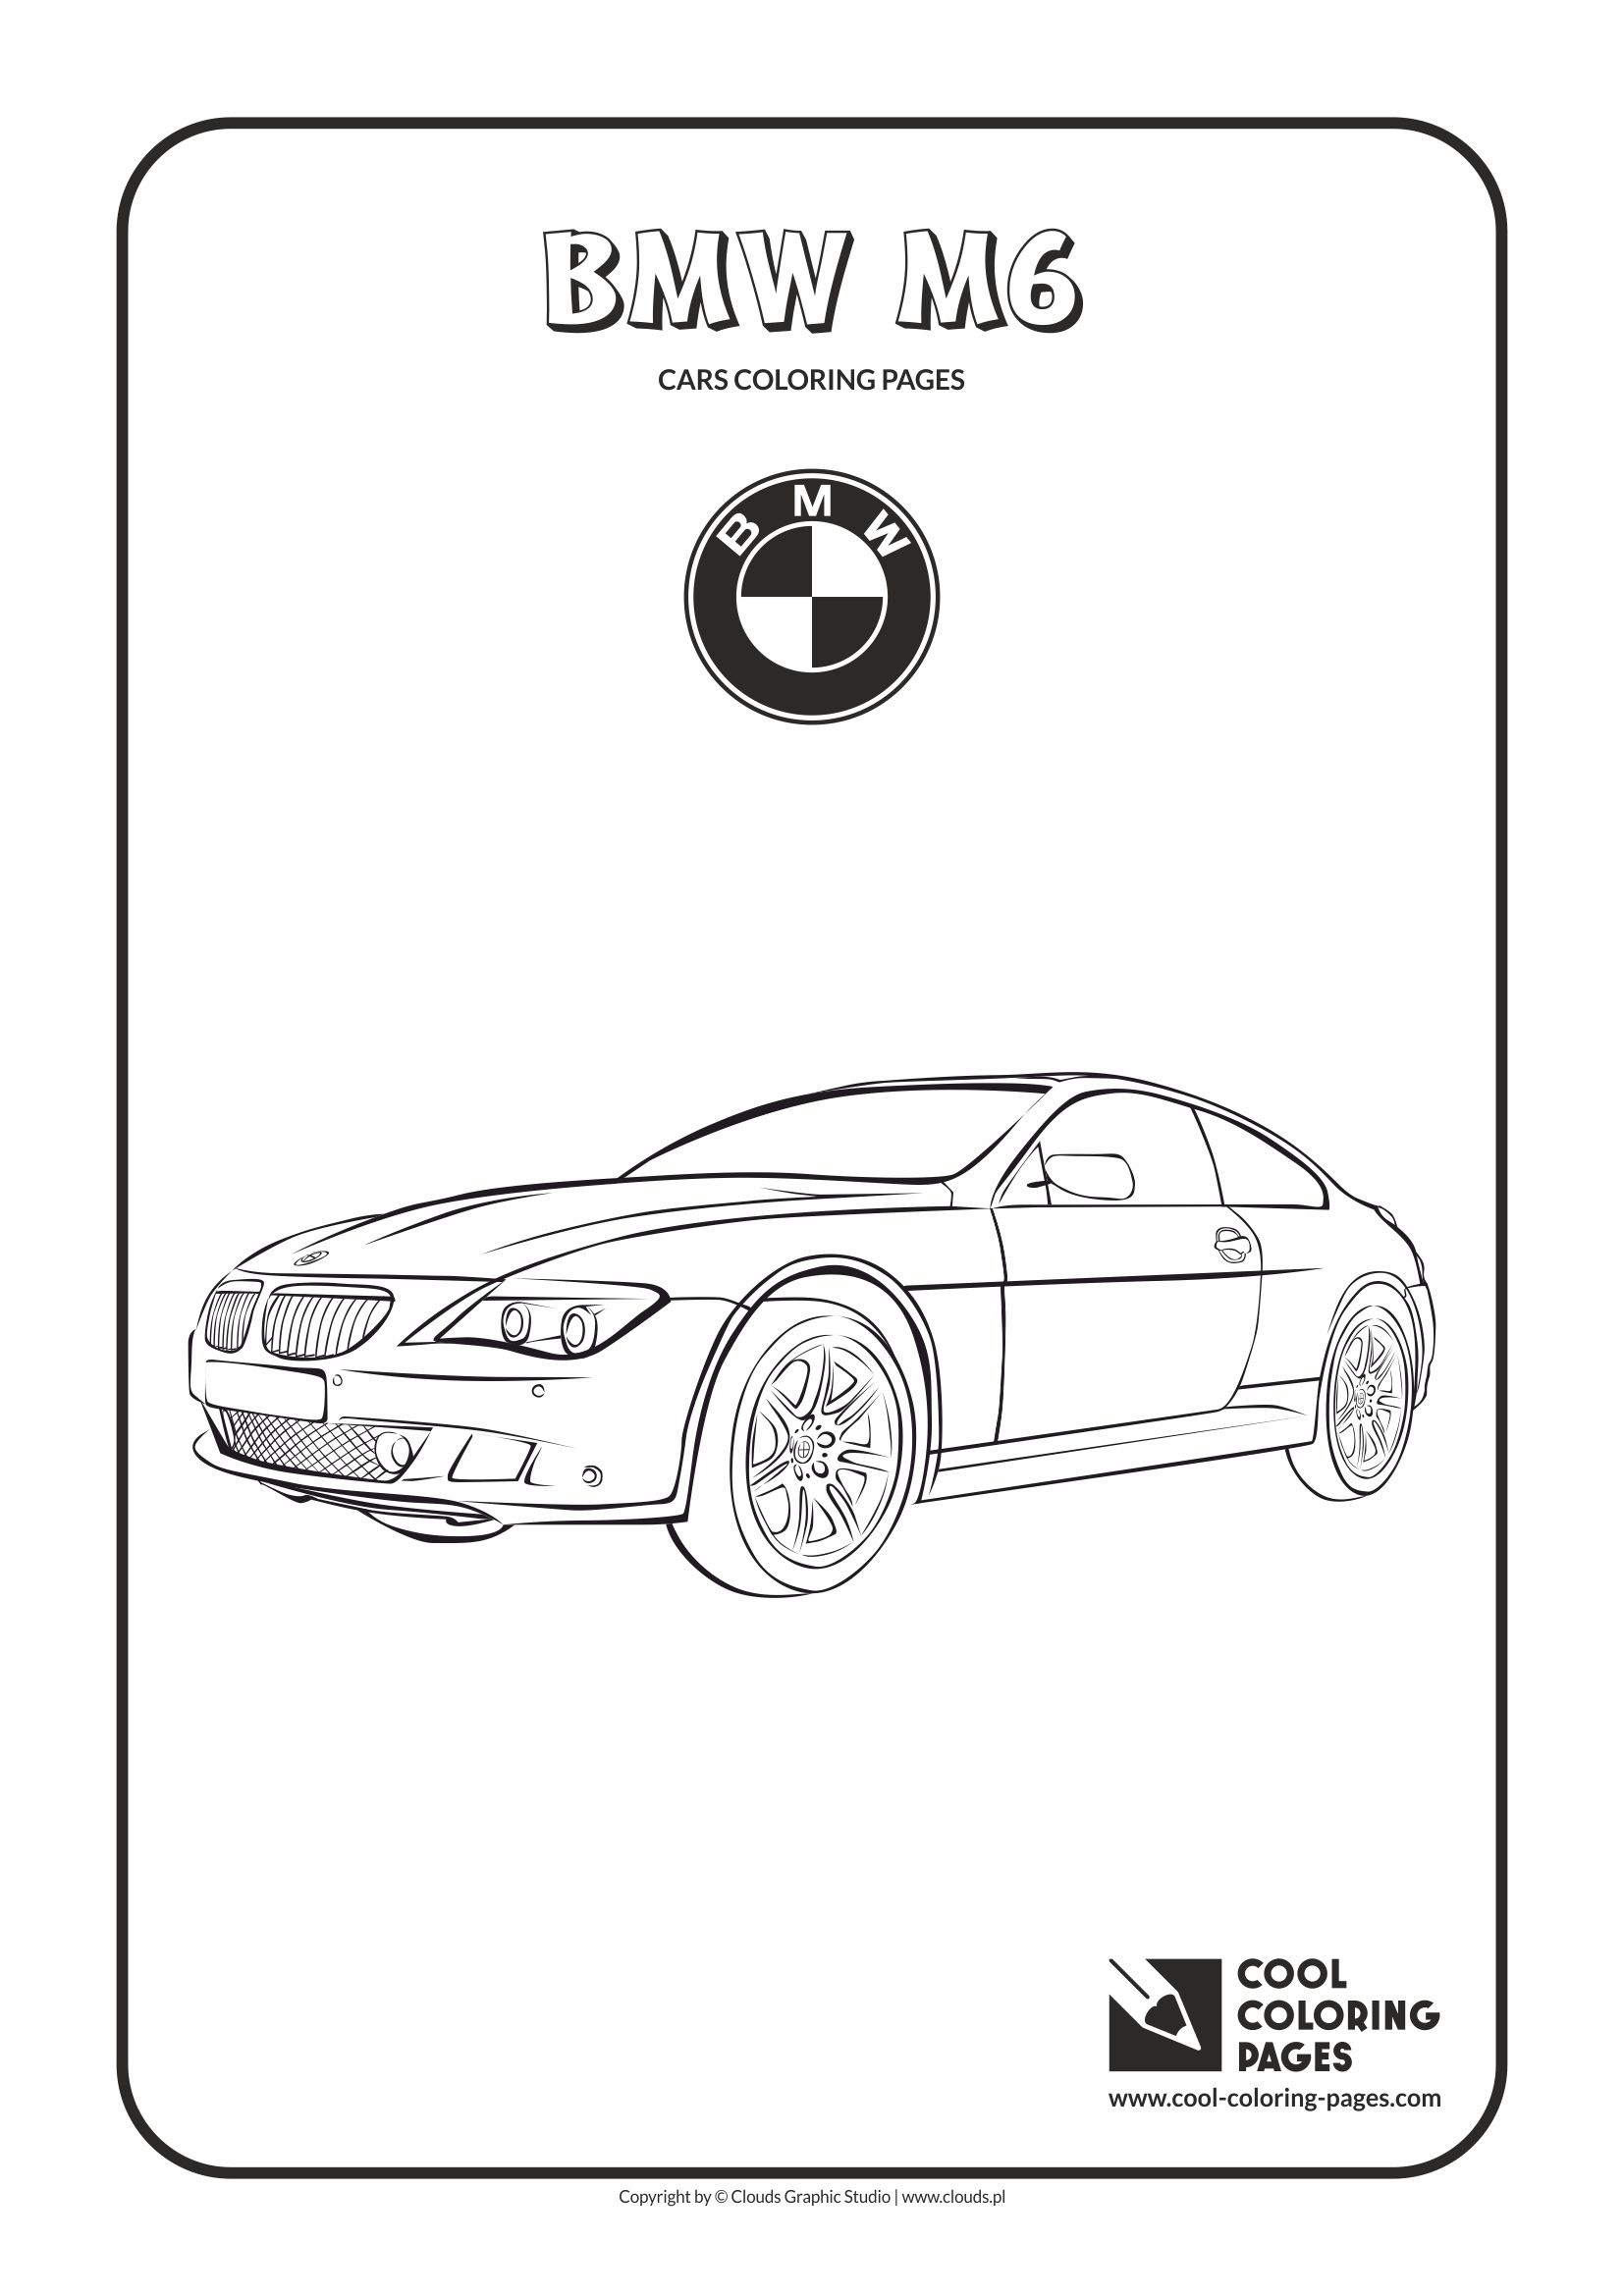 Cool Coloring Pages - Vehicles / Bmw M6 / Coloring page with Bmw M6